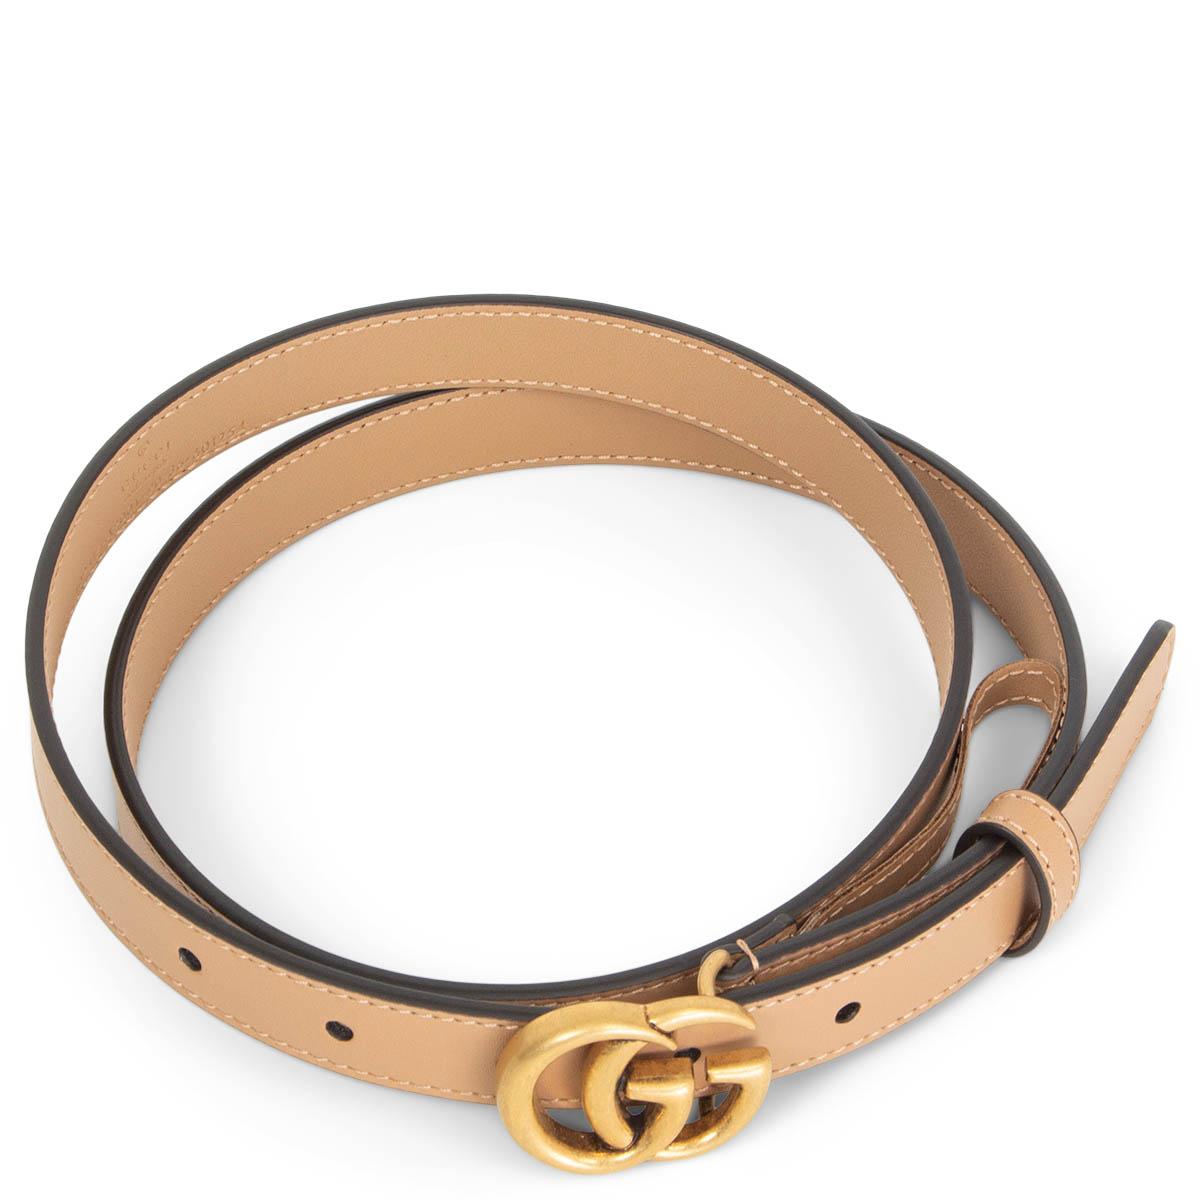 100% authentic Gucci GG Marmont Thin Belt in beige leather and featuring and antique gold-tone metal buckle. Brand new. Comes with dust bag. 

Measurements
Tag Size	90
Width	2cm (0.8in)
Fits	85cm (33.2in) to 95cm (37.1in)
Length	105cm (41in)
Buckle